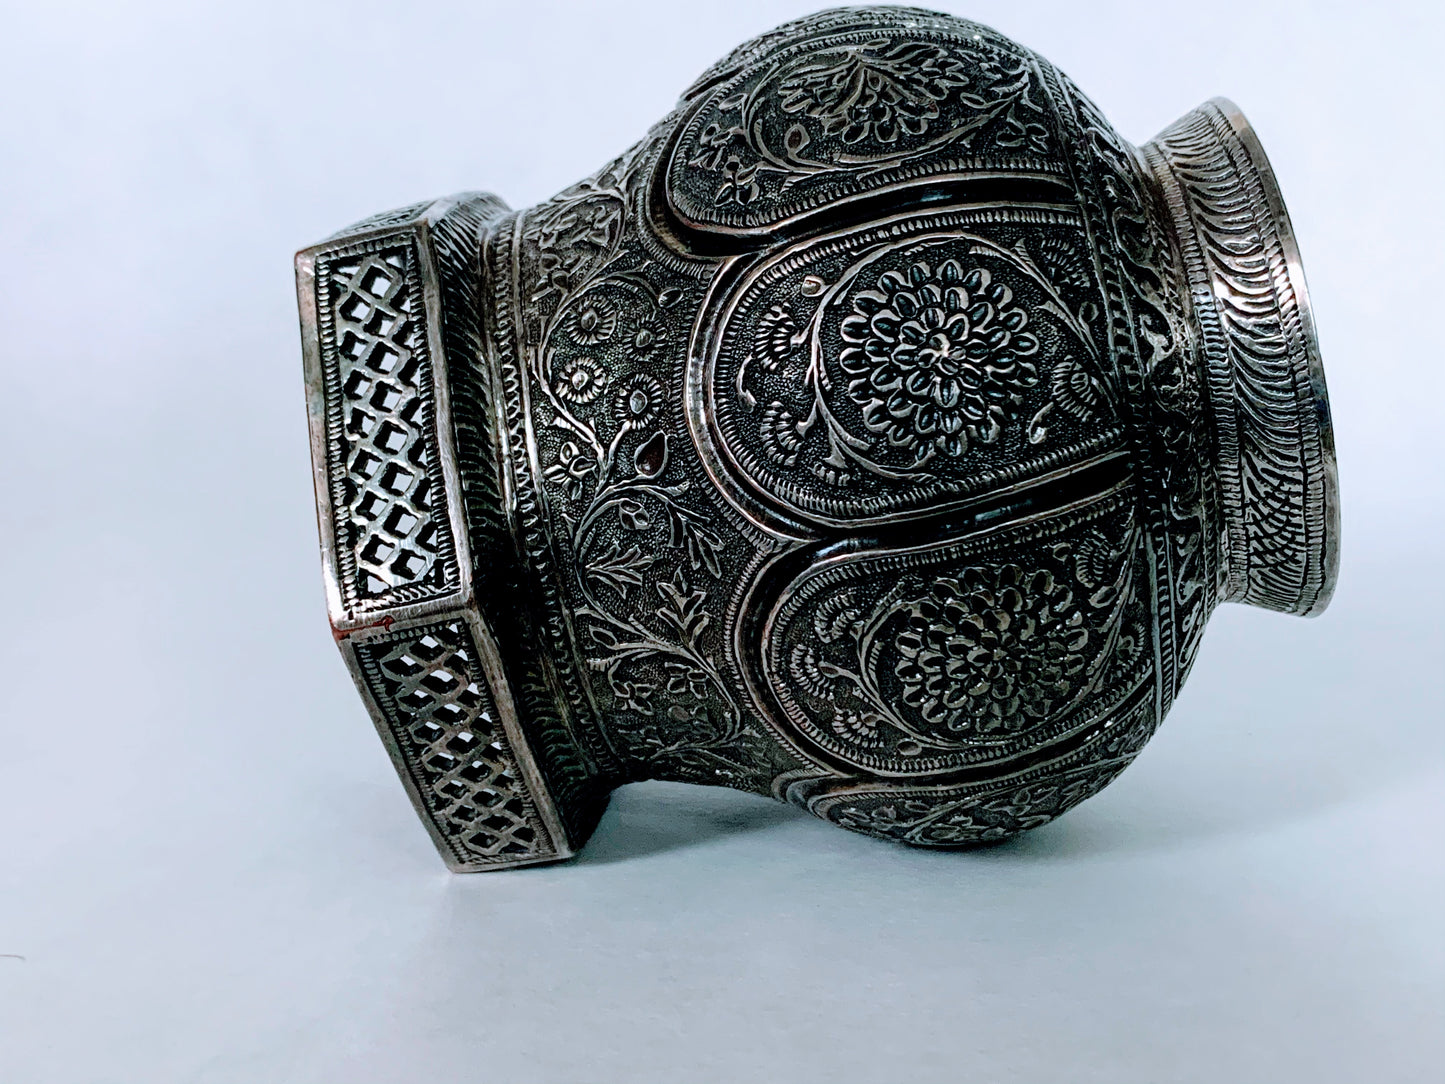 An exquisitely carved antique silver utensil -possibly a censer with floral details